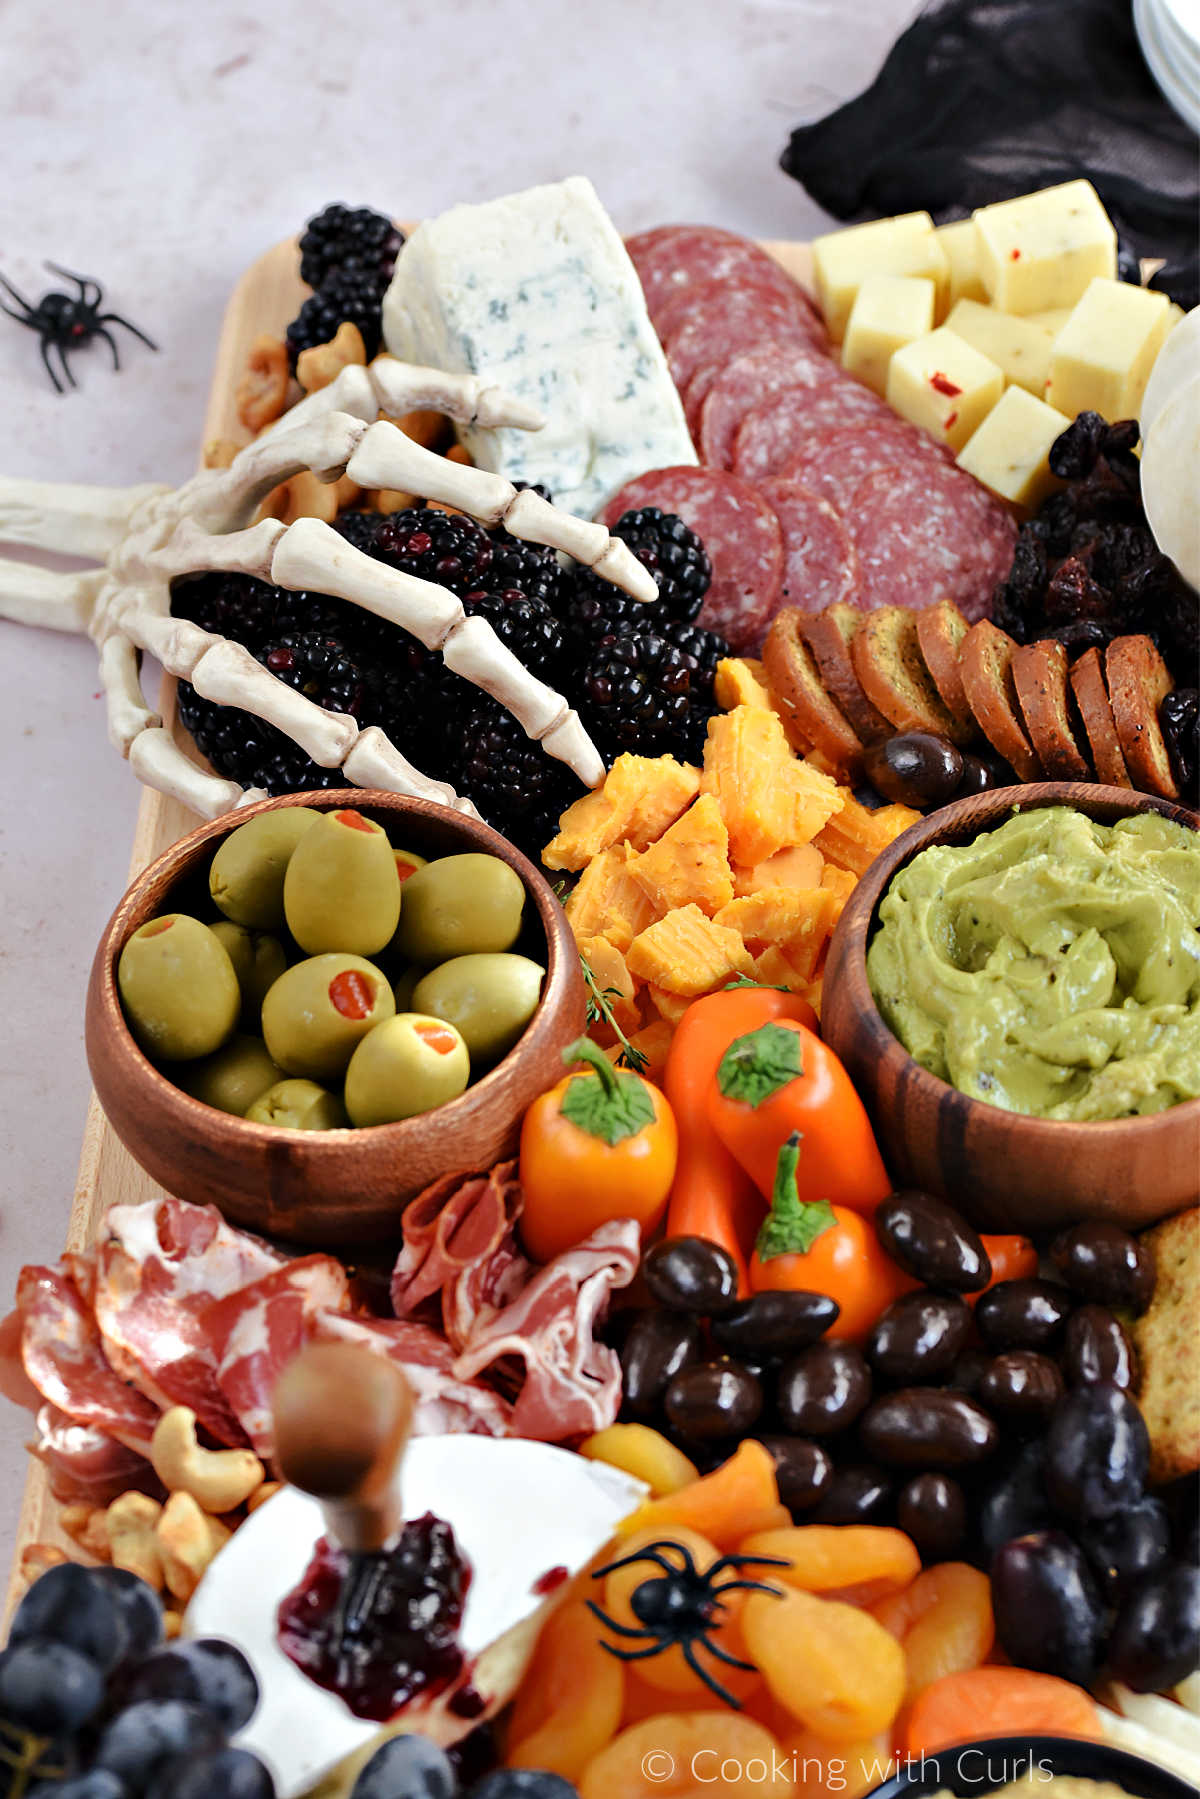 Meats, cheeses, fruits, and nuts on a wood board.